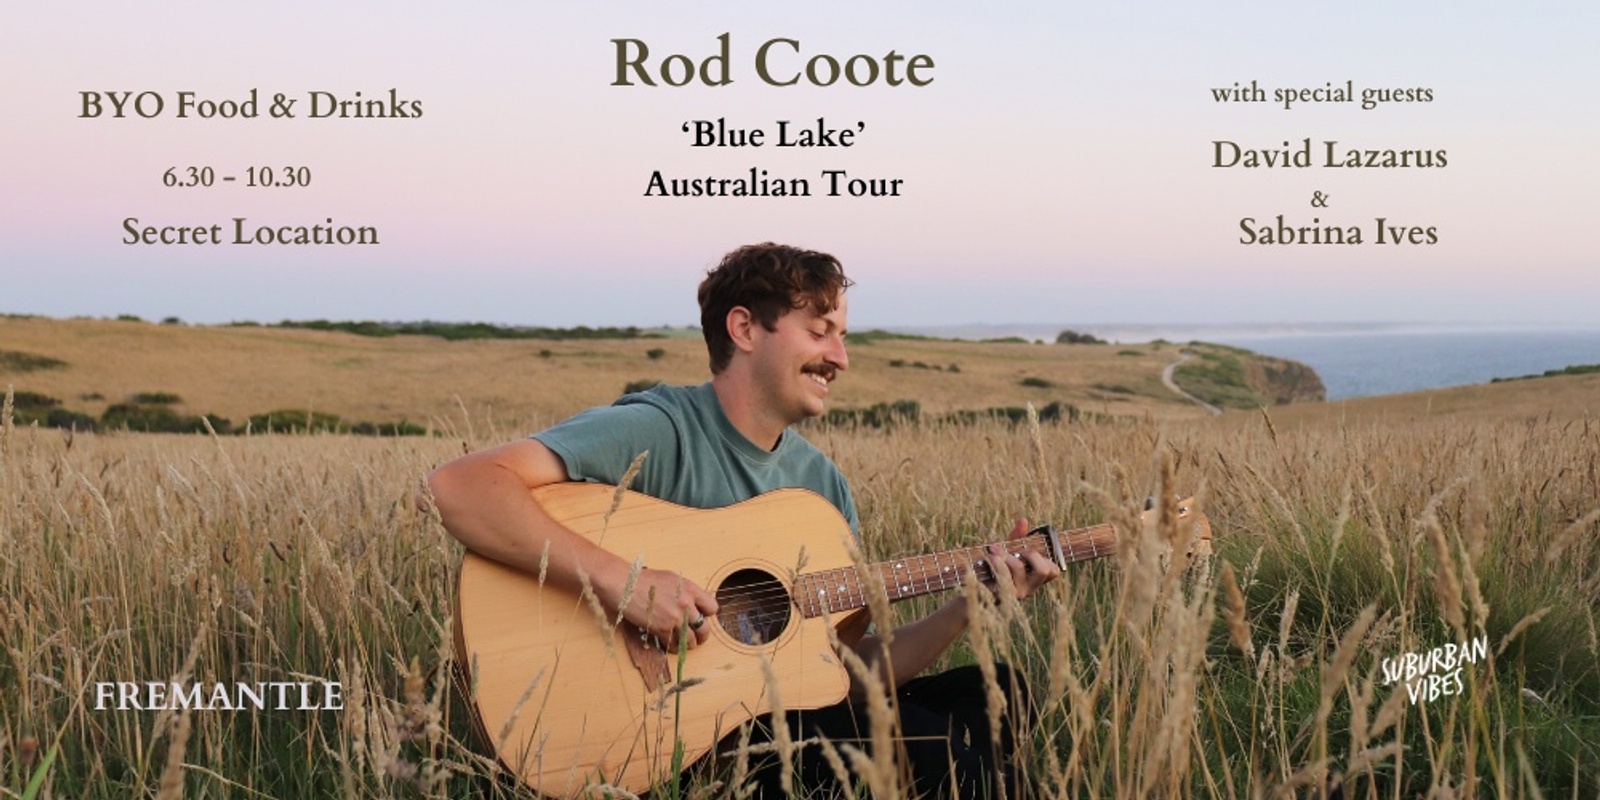 Banner image for Suburban Vibes Presents - Rod Coote w/ Guests David Lazarus & Sabrina Ives